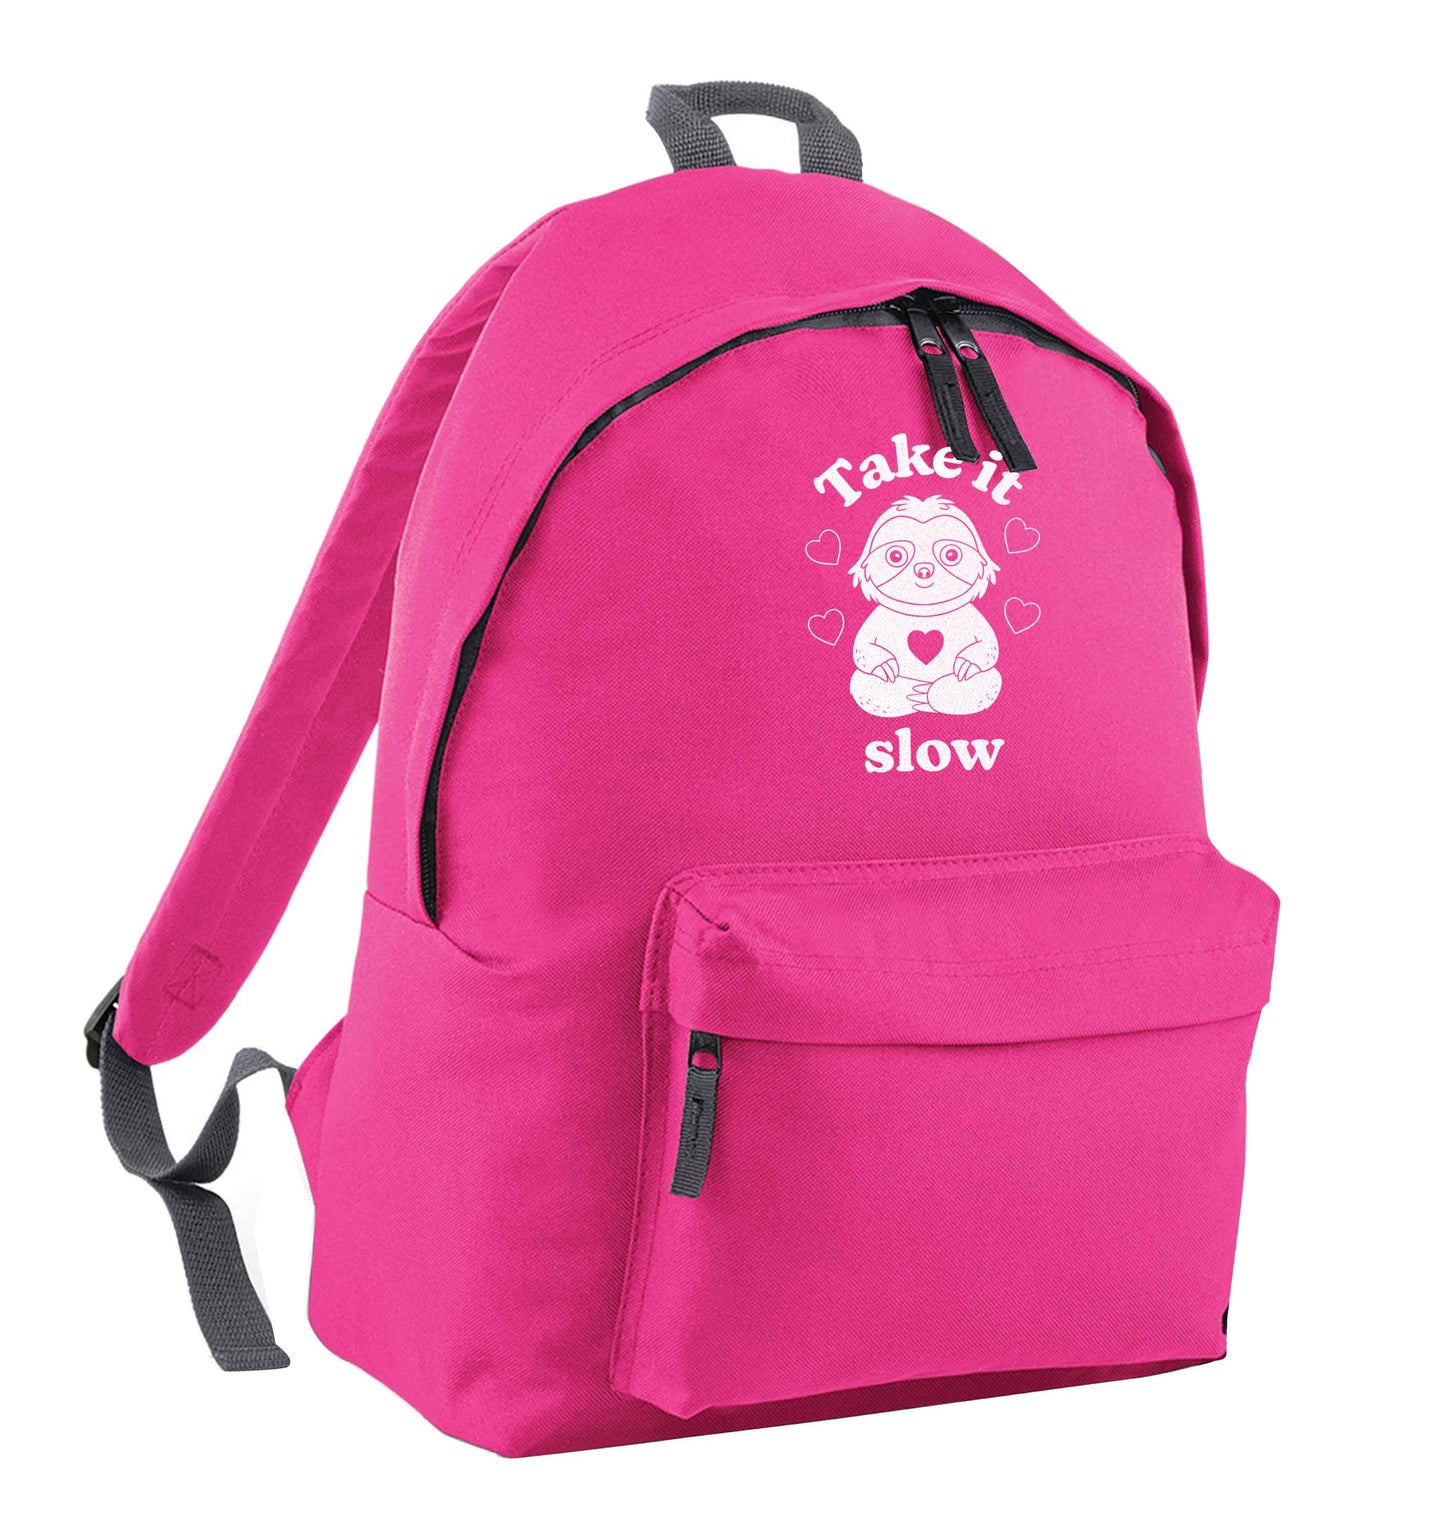 Take it slow pink children's backpack